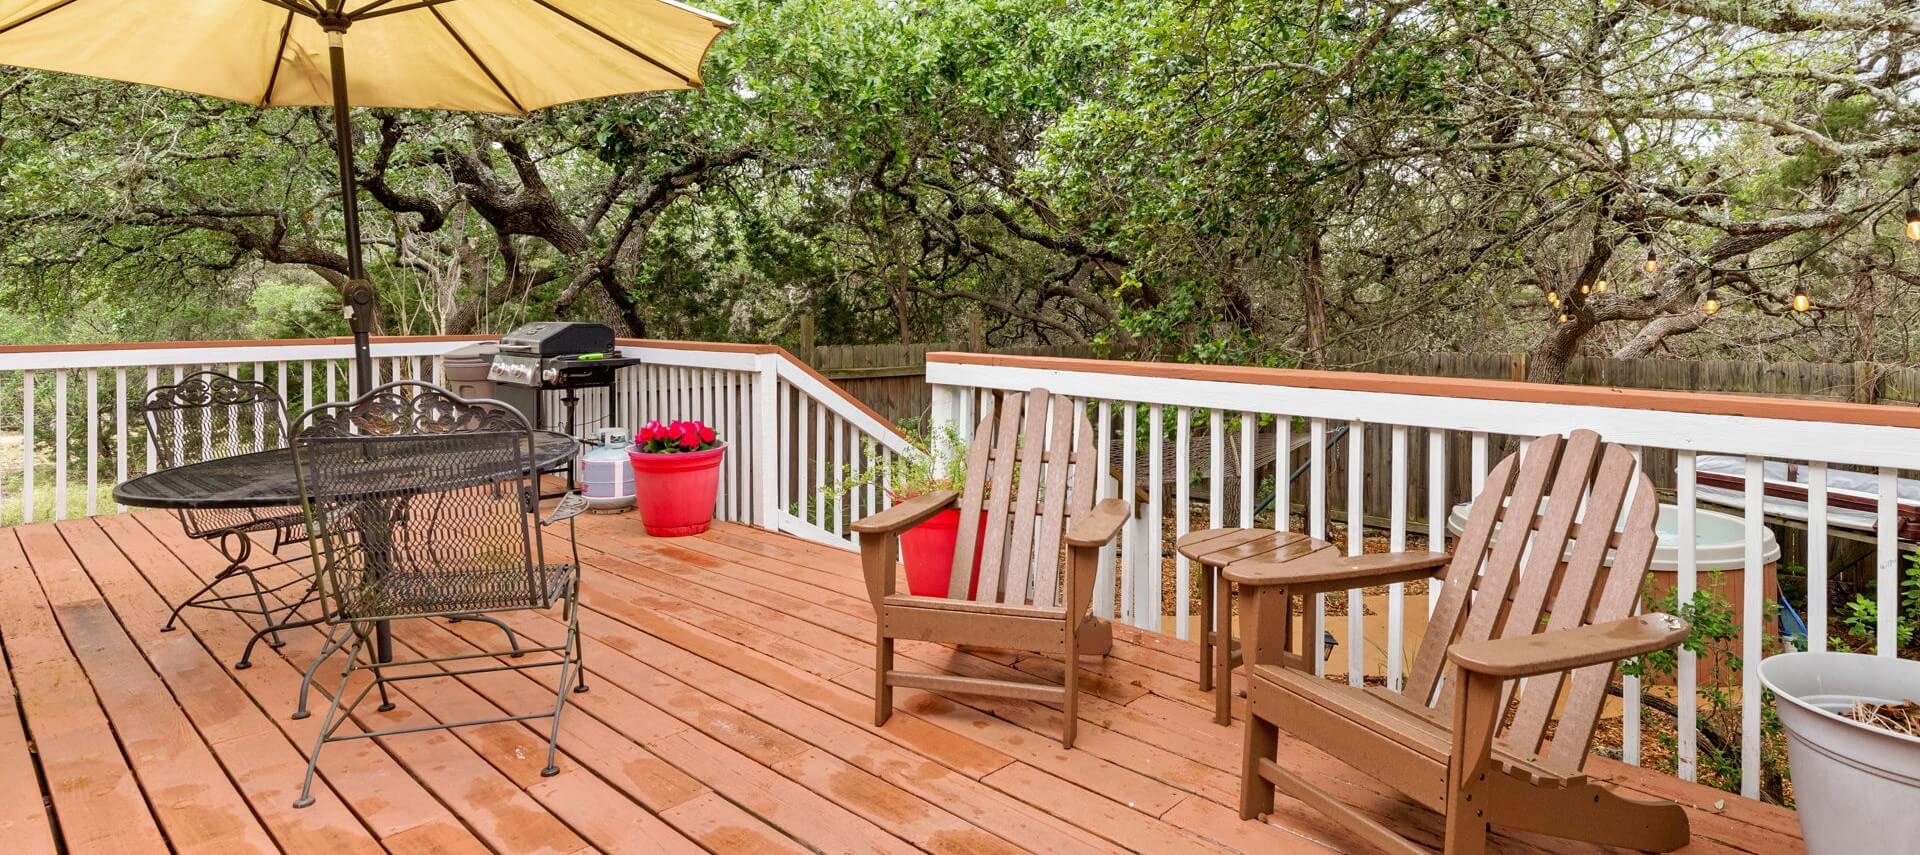 Deck with large oak trees and a patio table, BBQ grill and two chairs.